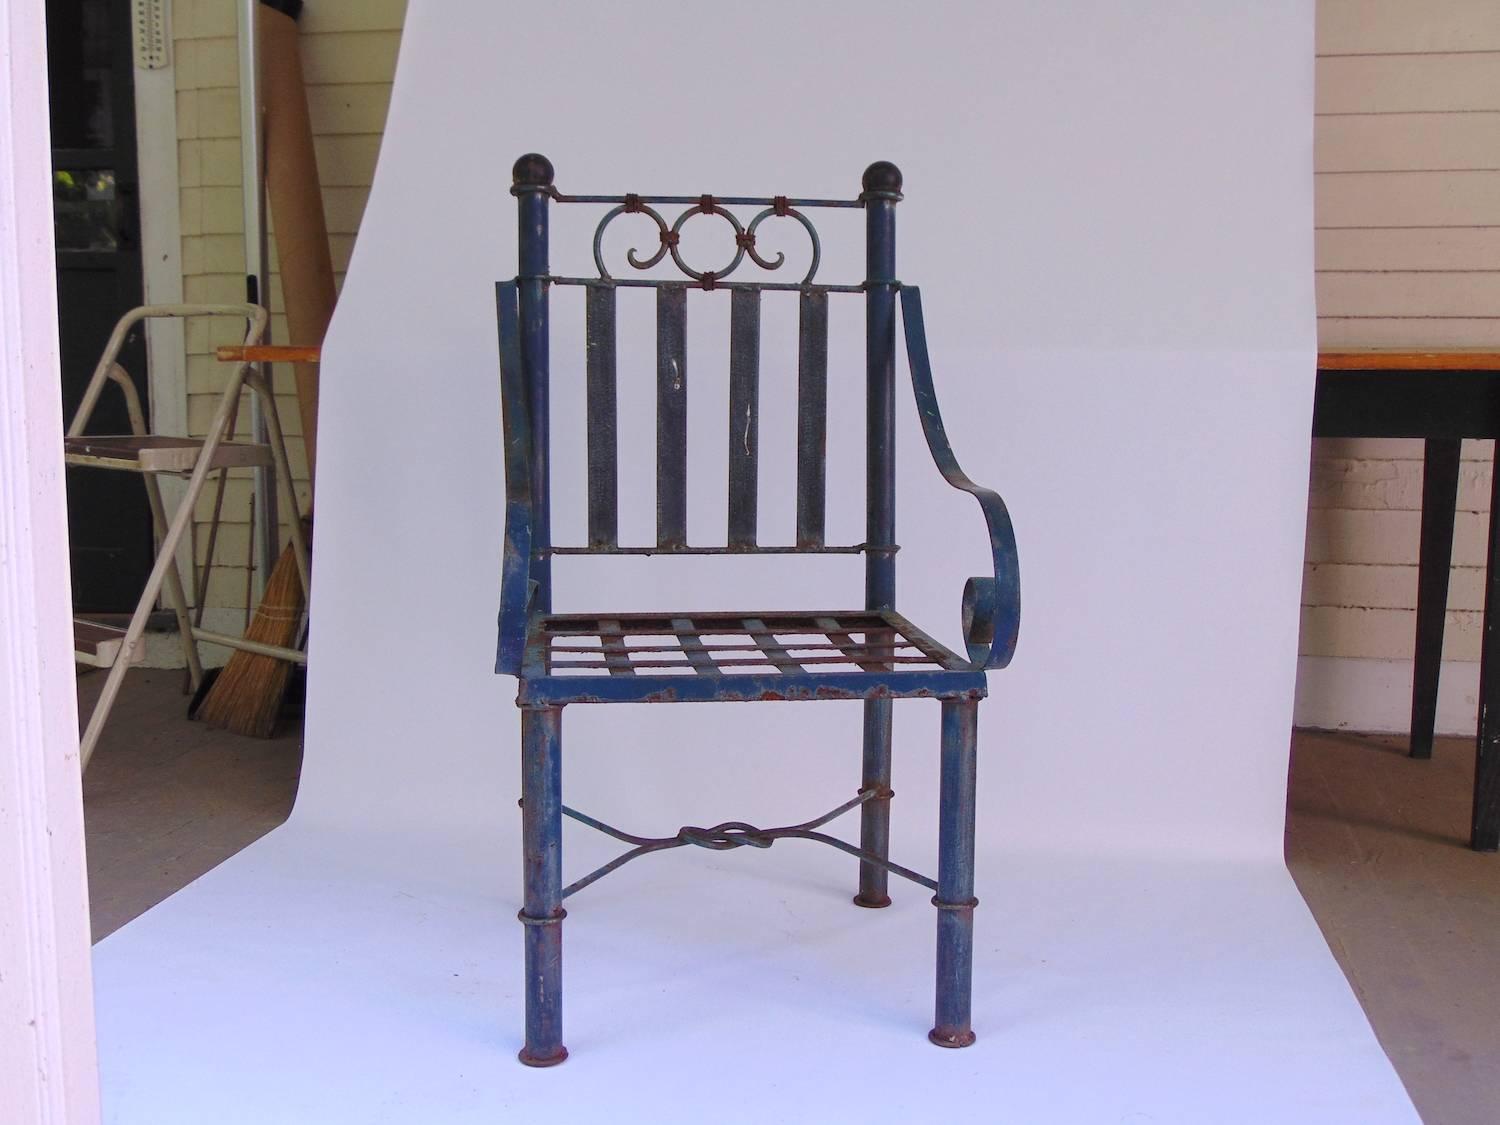 Handsome blue-green metal 19th century American strap work garden chair.
Measure: Height to seat 16.